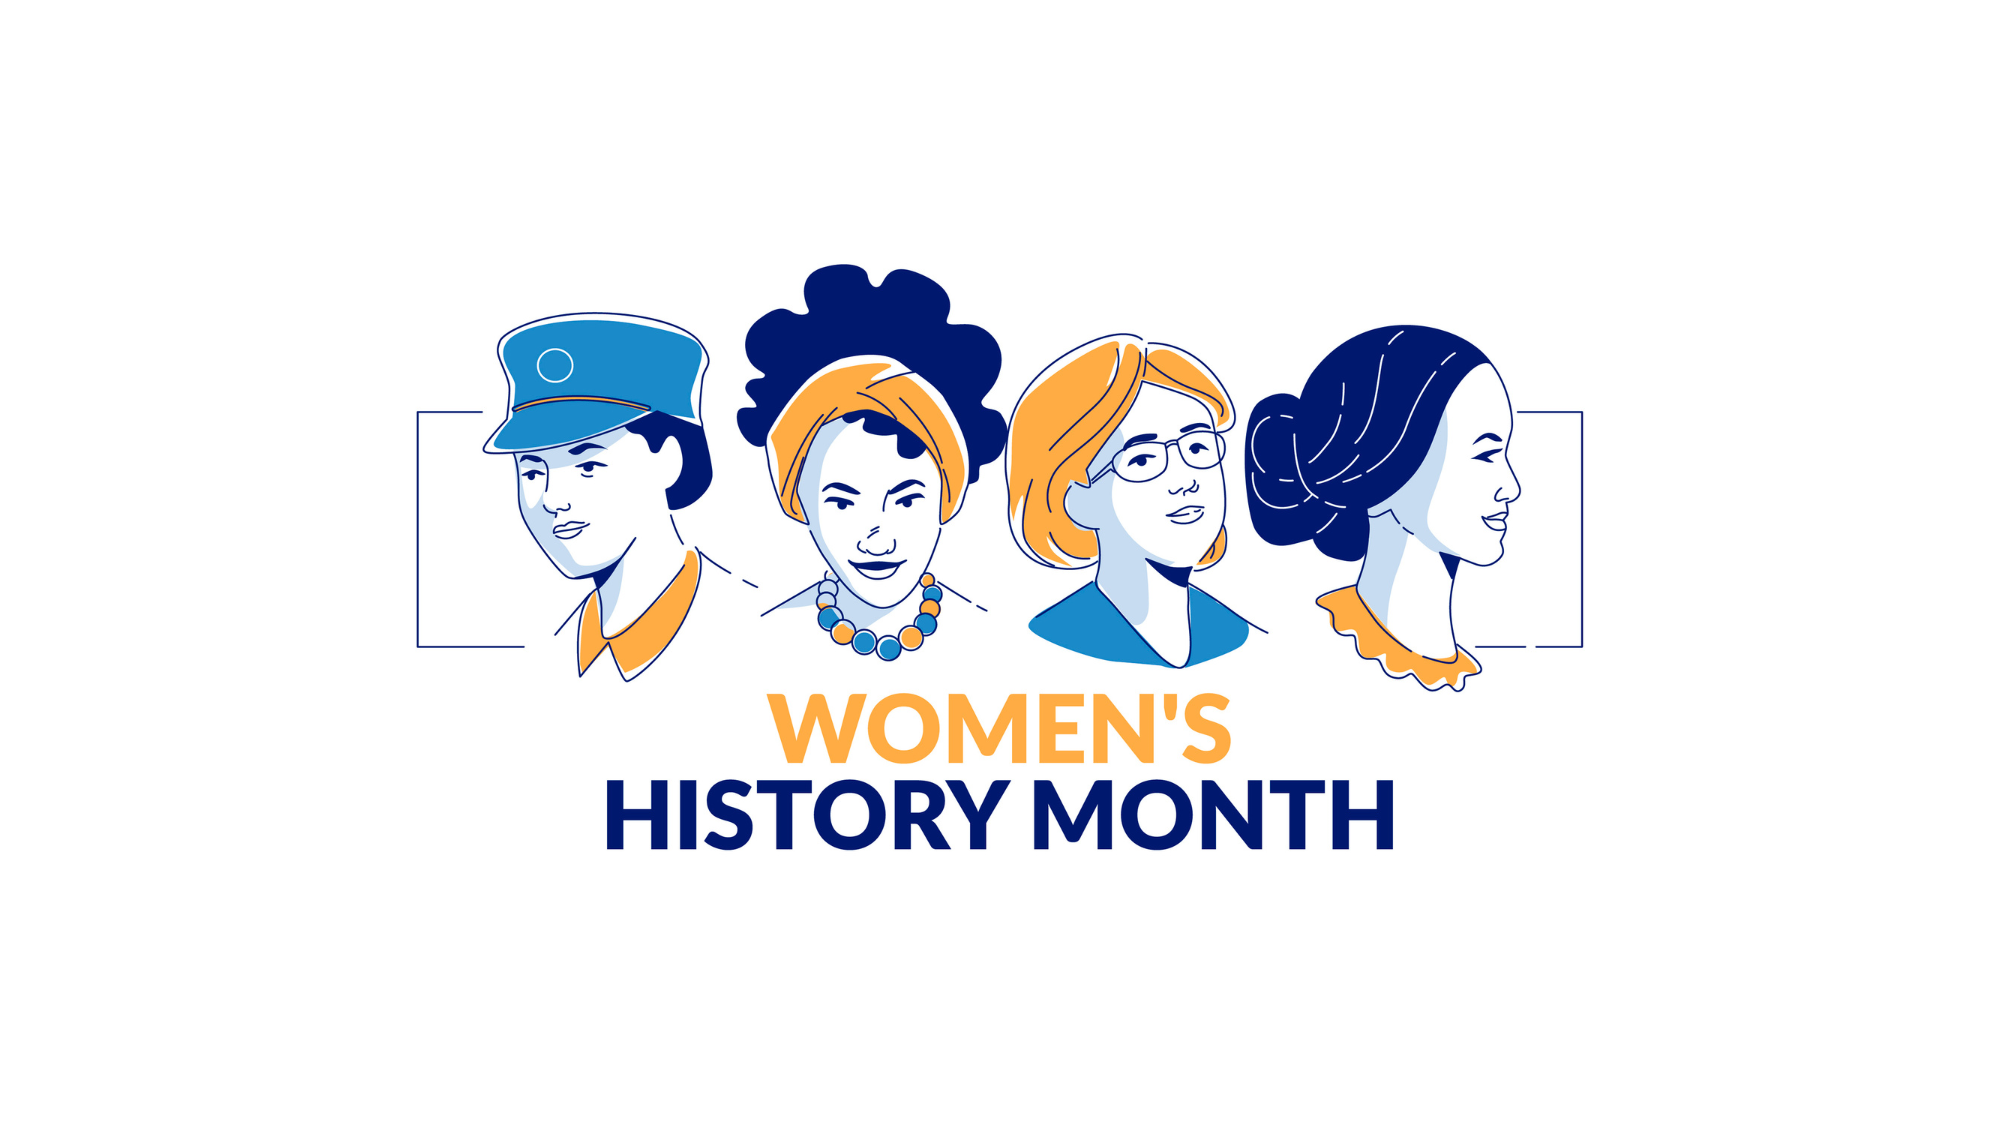 Flat women's history month illustration in navy, aqua and goldenrod yellow depicting four people across the image.